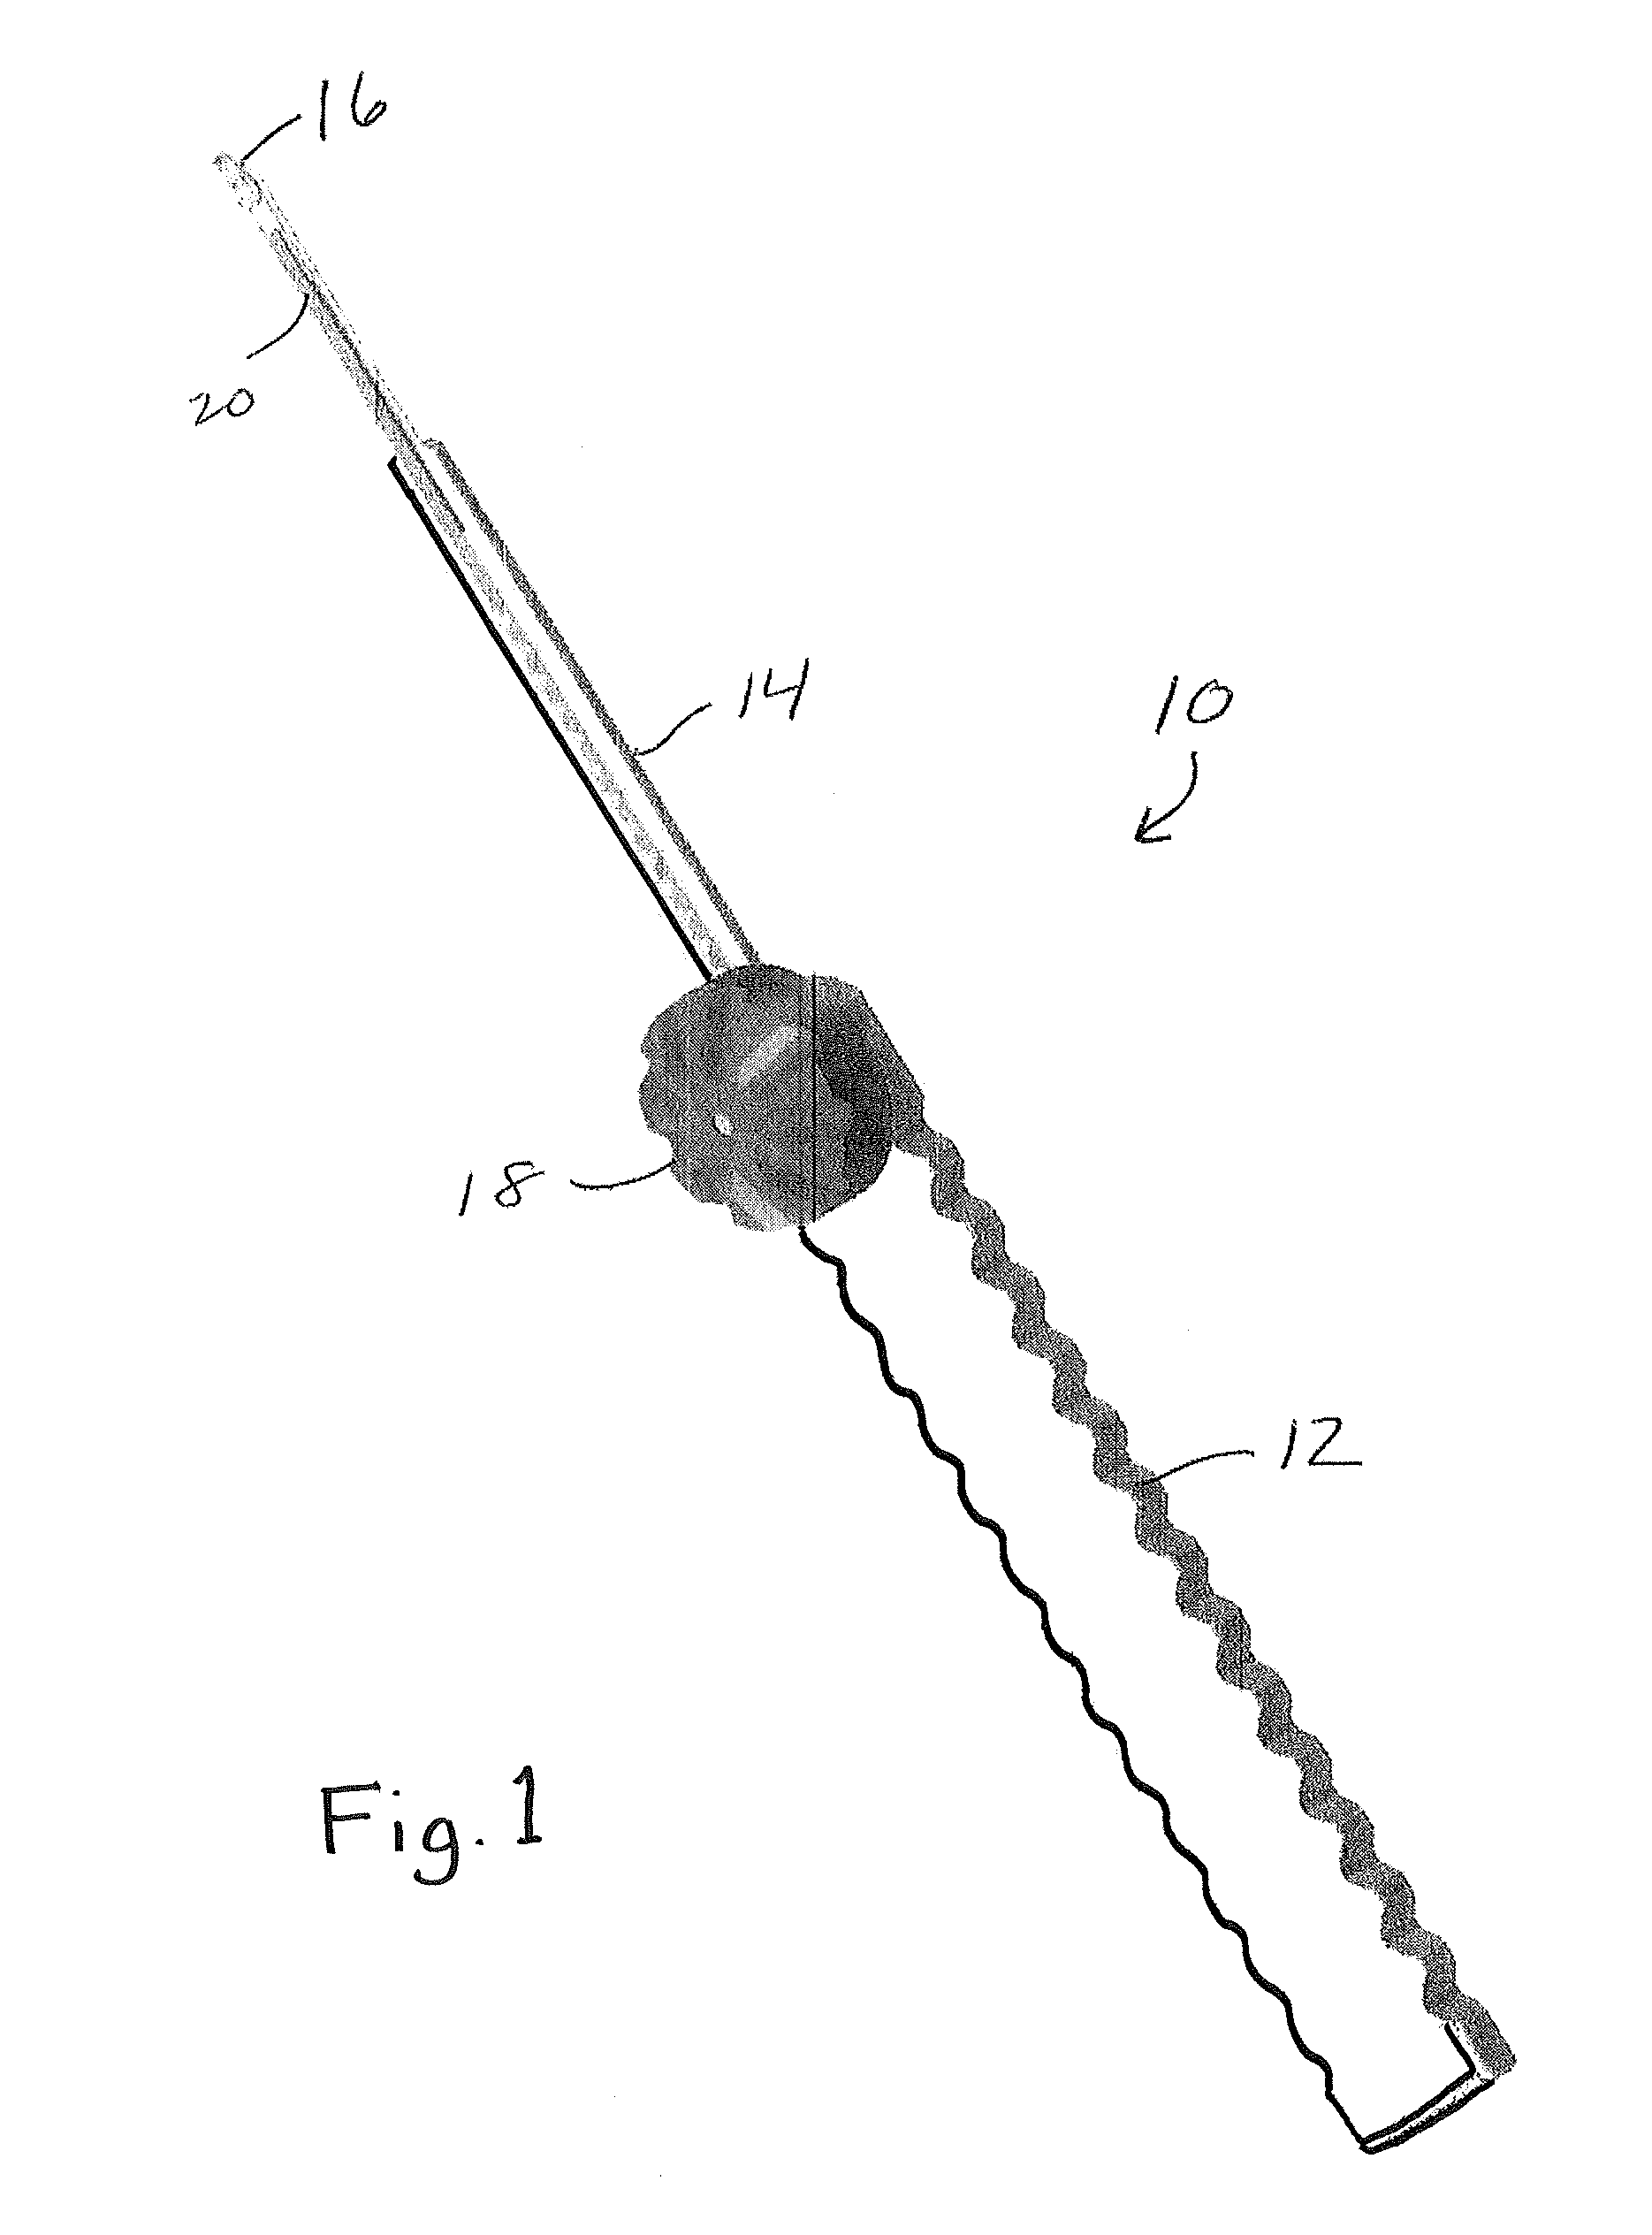 Capsulotomy devices and methods